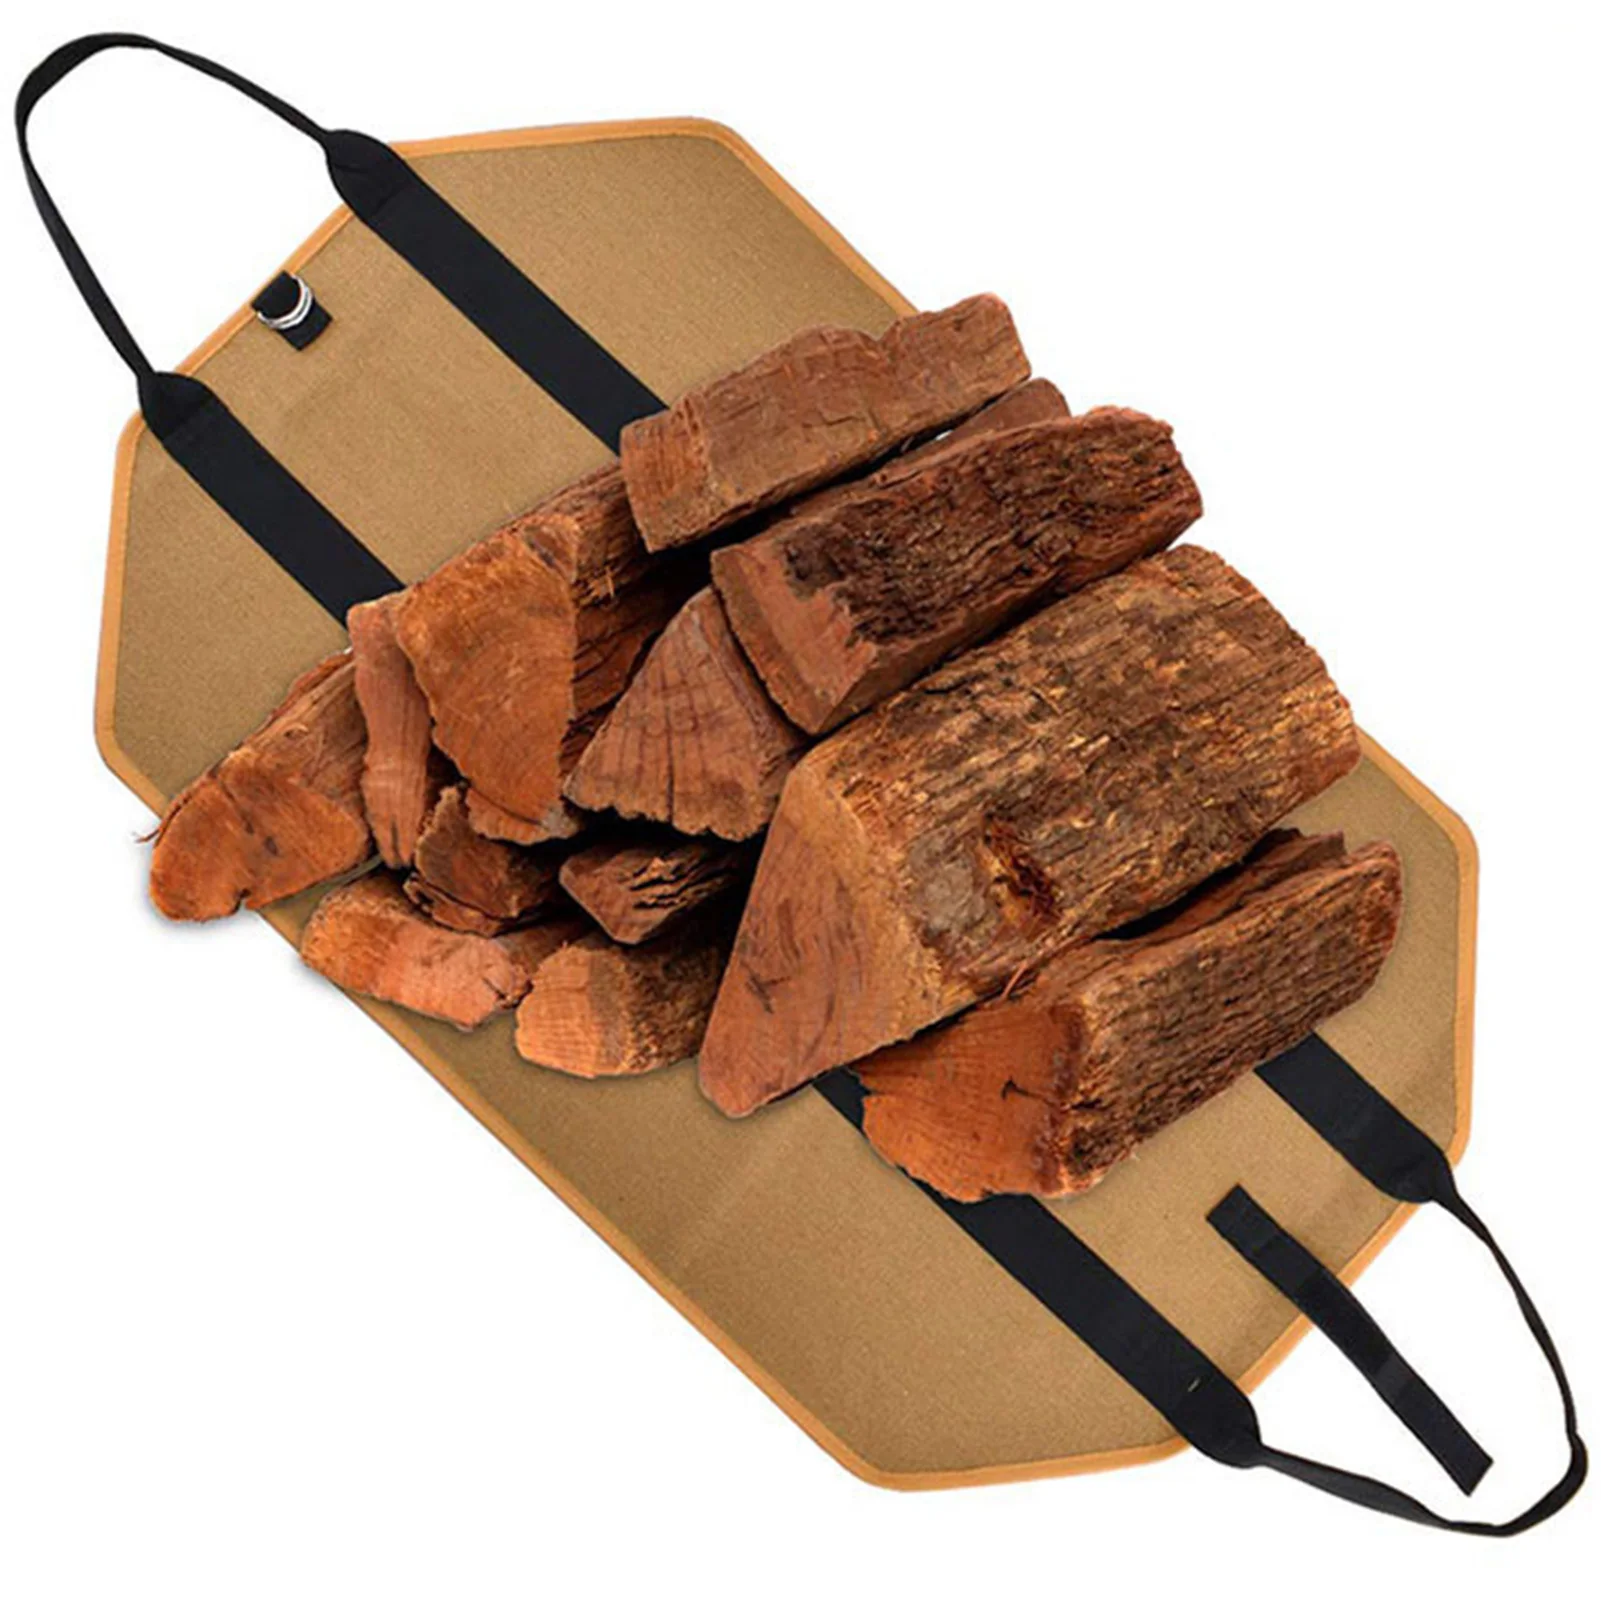 Firewood Log Carrier Multifunctional Fire Wood Tote Bag Canvas Bag Carrying  Wood At Home Or Outdoors Fireplace And Campfire - AliExpress